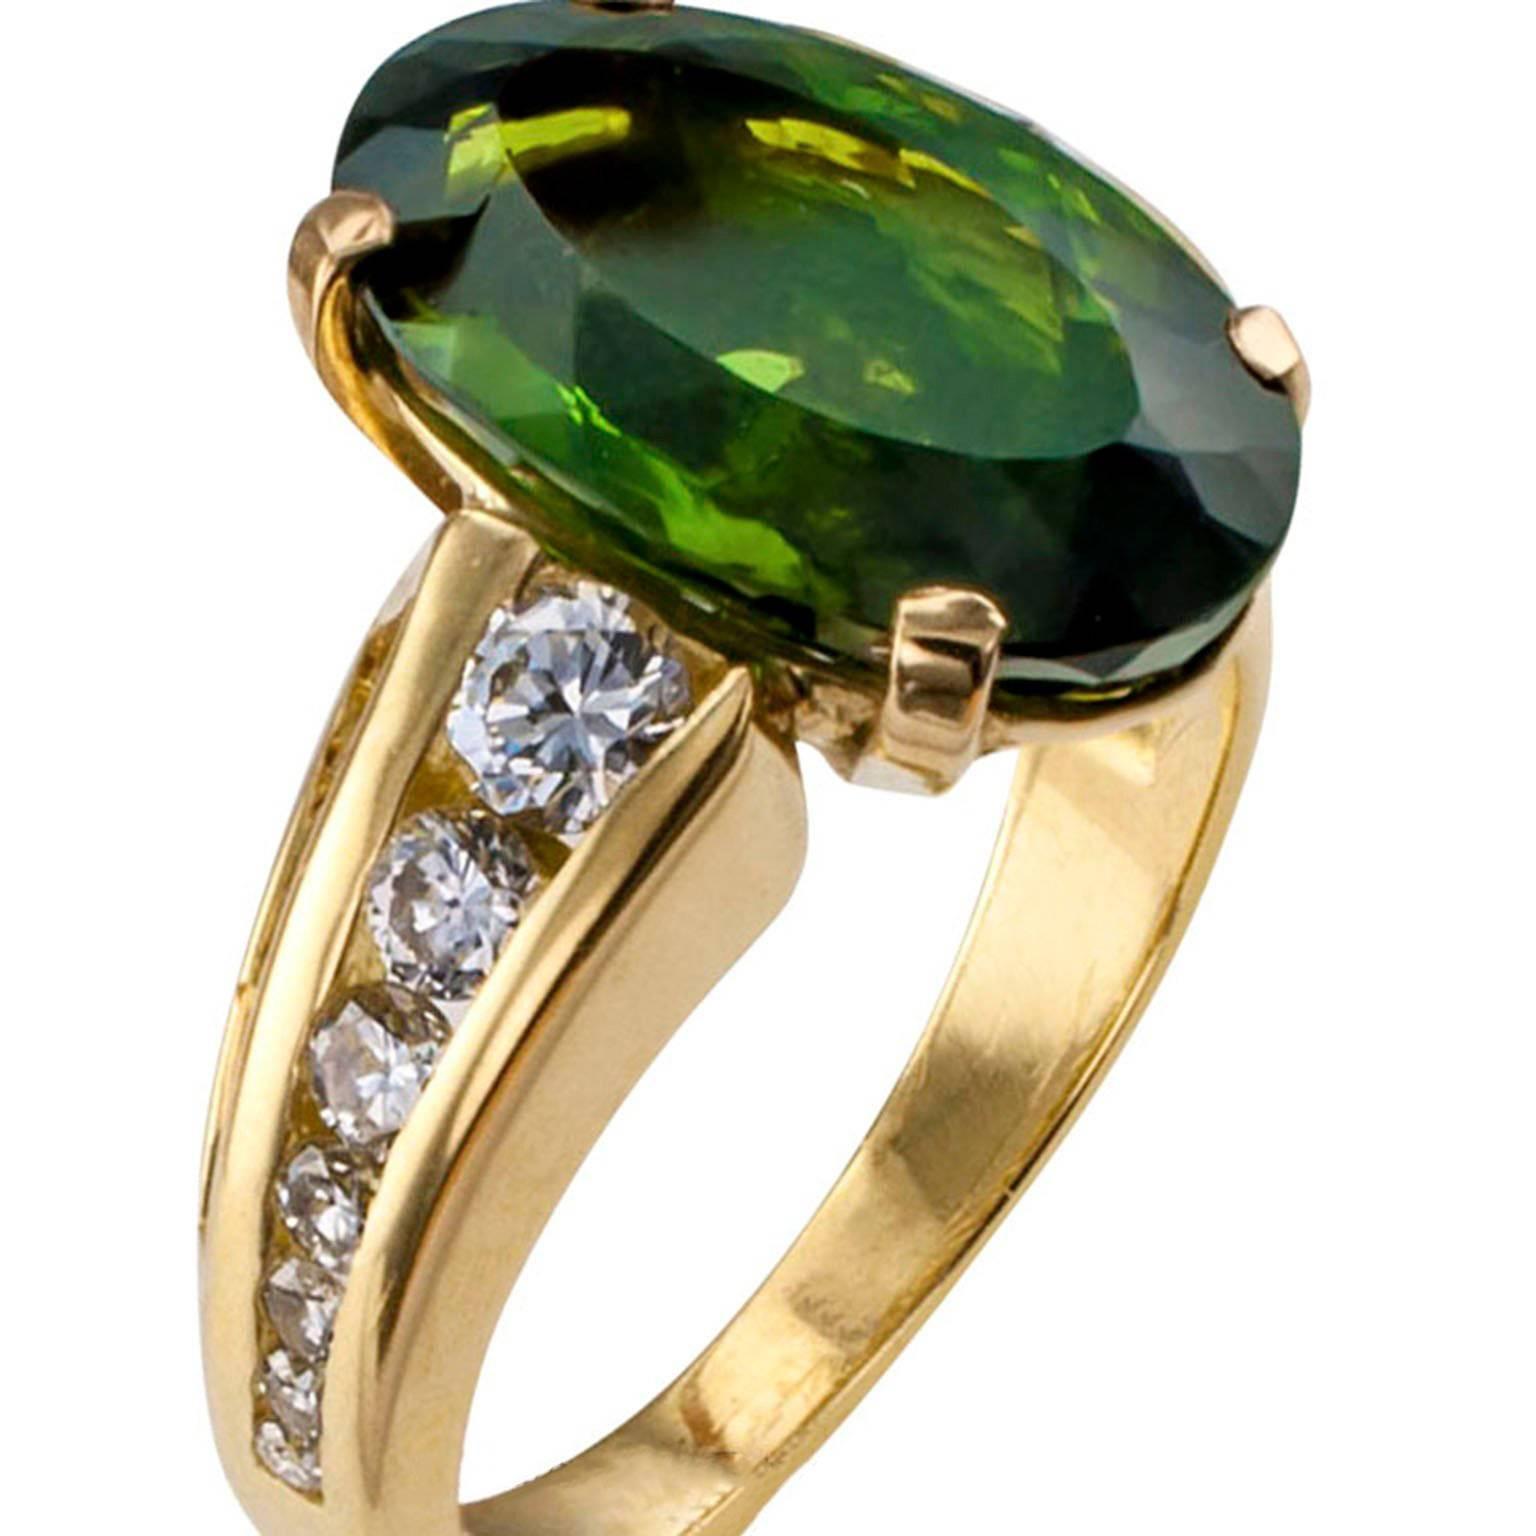 Green Tourmaline Diamond Gold Ring

1980s green oval tourmaline ring round and baguette diamonds mounted in 18 karat yellow gold.  Possessing a deep and satisfying color and weighing approximately 6.75 carats, the large green tourmaline set